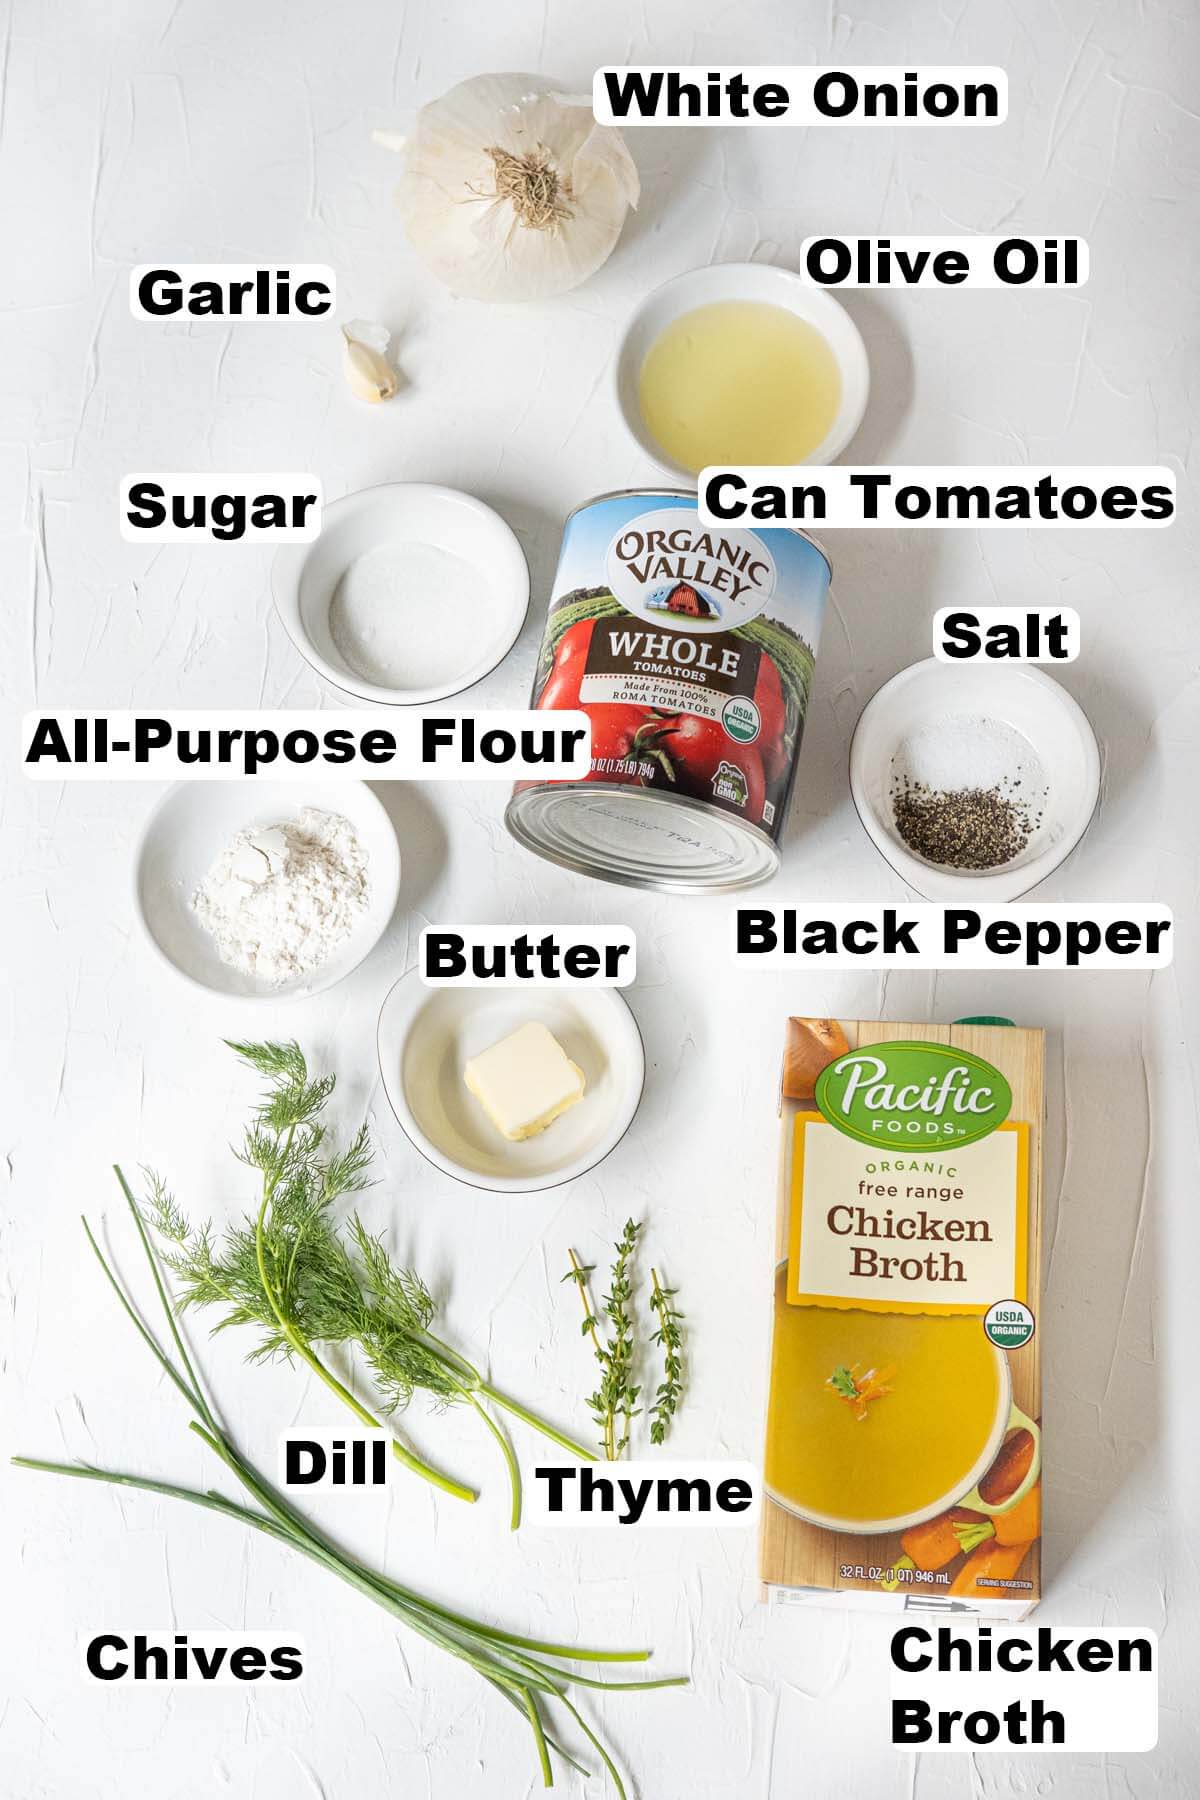 Classic tomato soup ingredients.